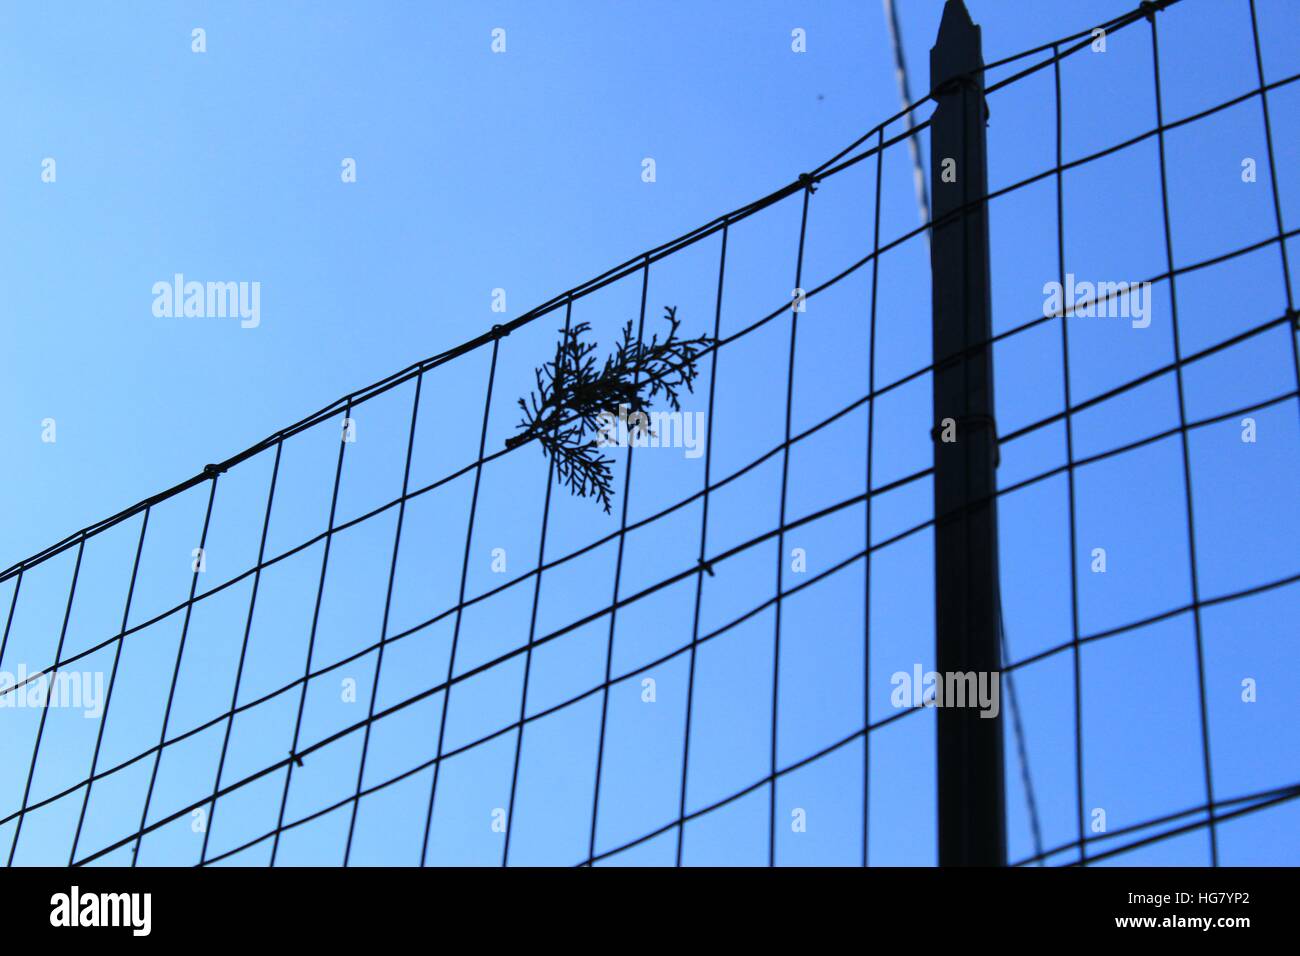 A sprig of Thuja caught in fencing against a blue sky. Stock Photo